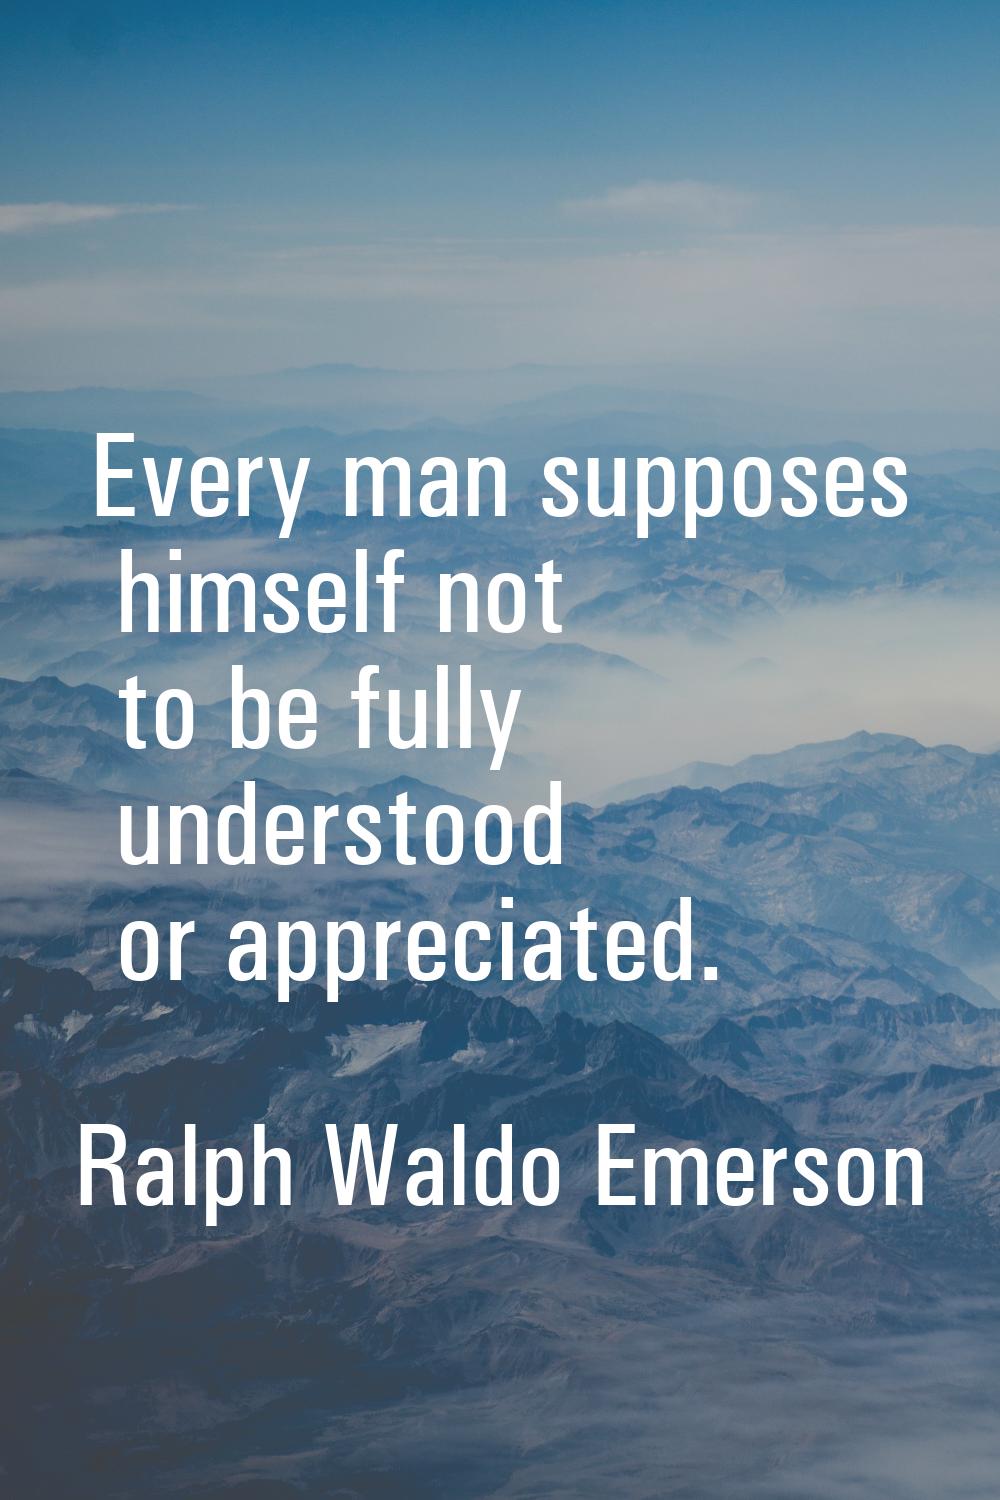 Every man supposes himself not to be fully understood or appreciated.